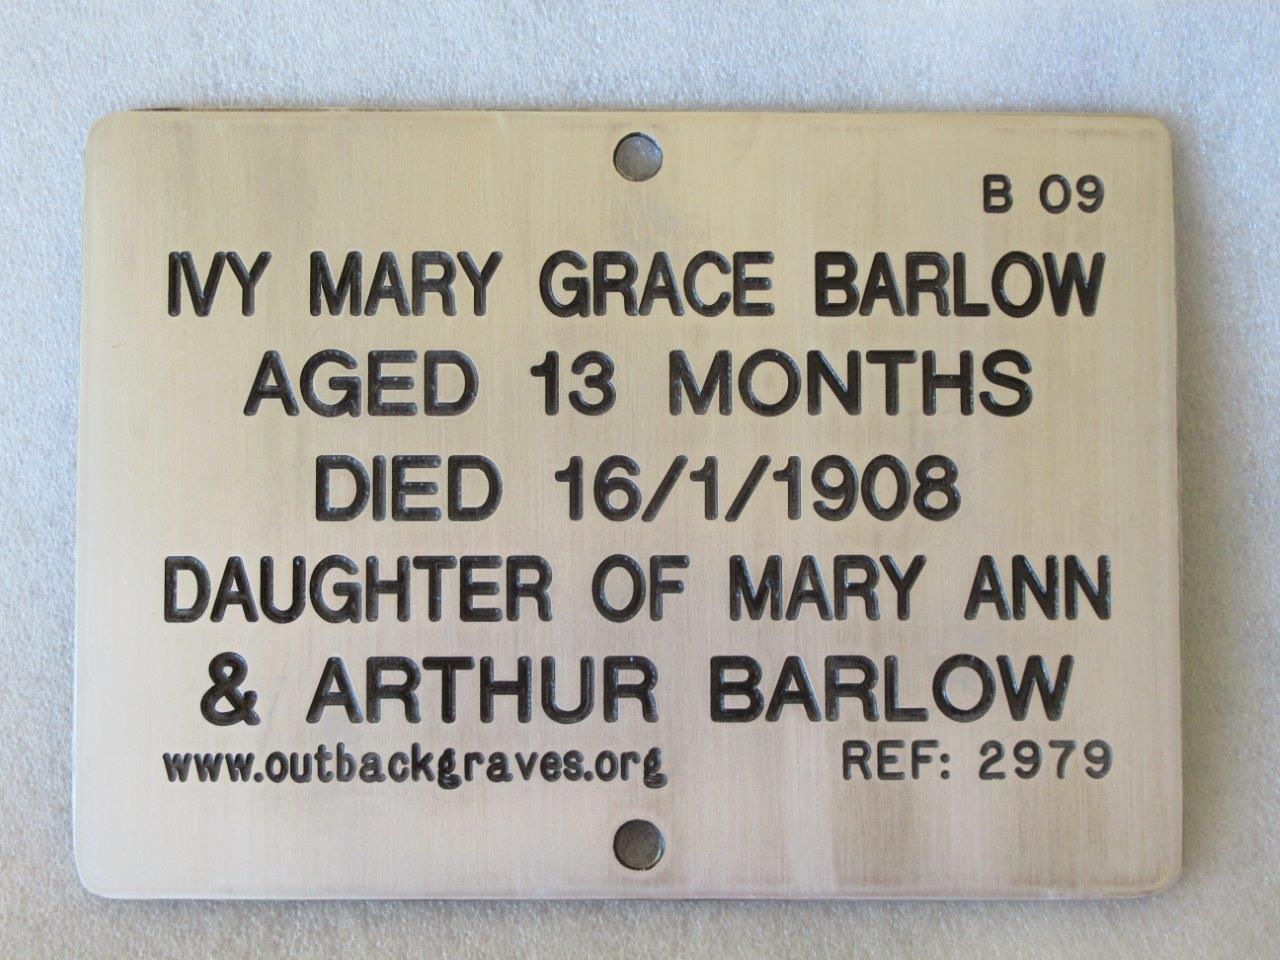 This is a photograph of plaque number 2979 for IVY MARY GRACE BARLOW at Mt MORGANS